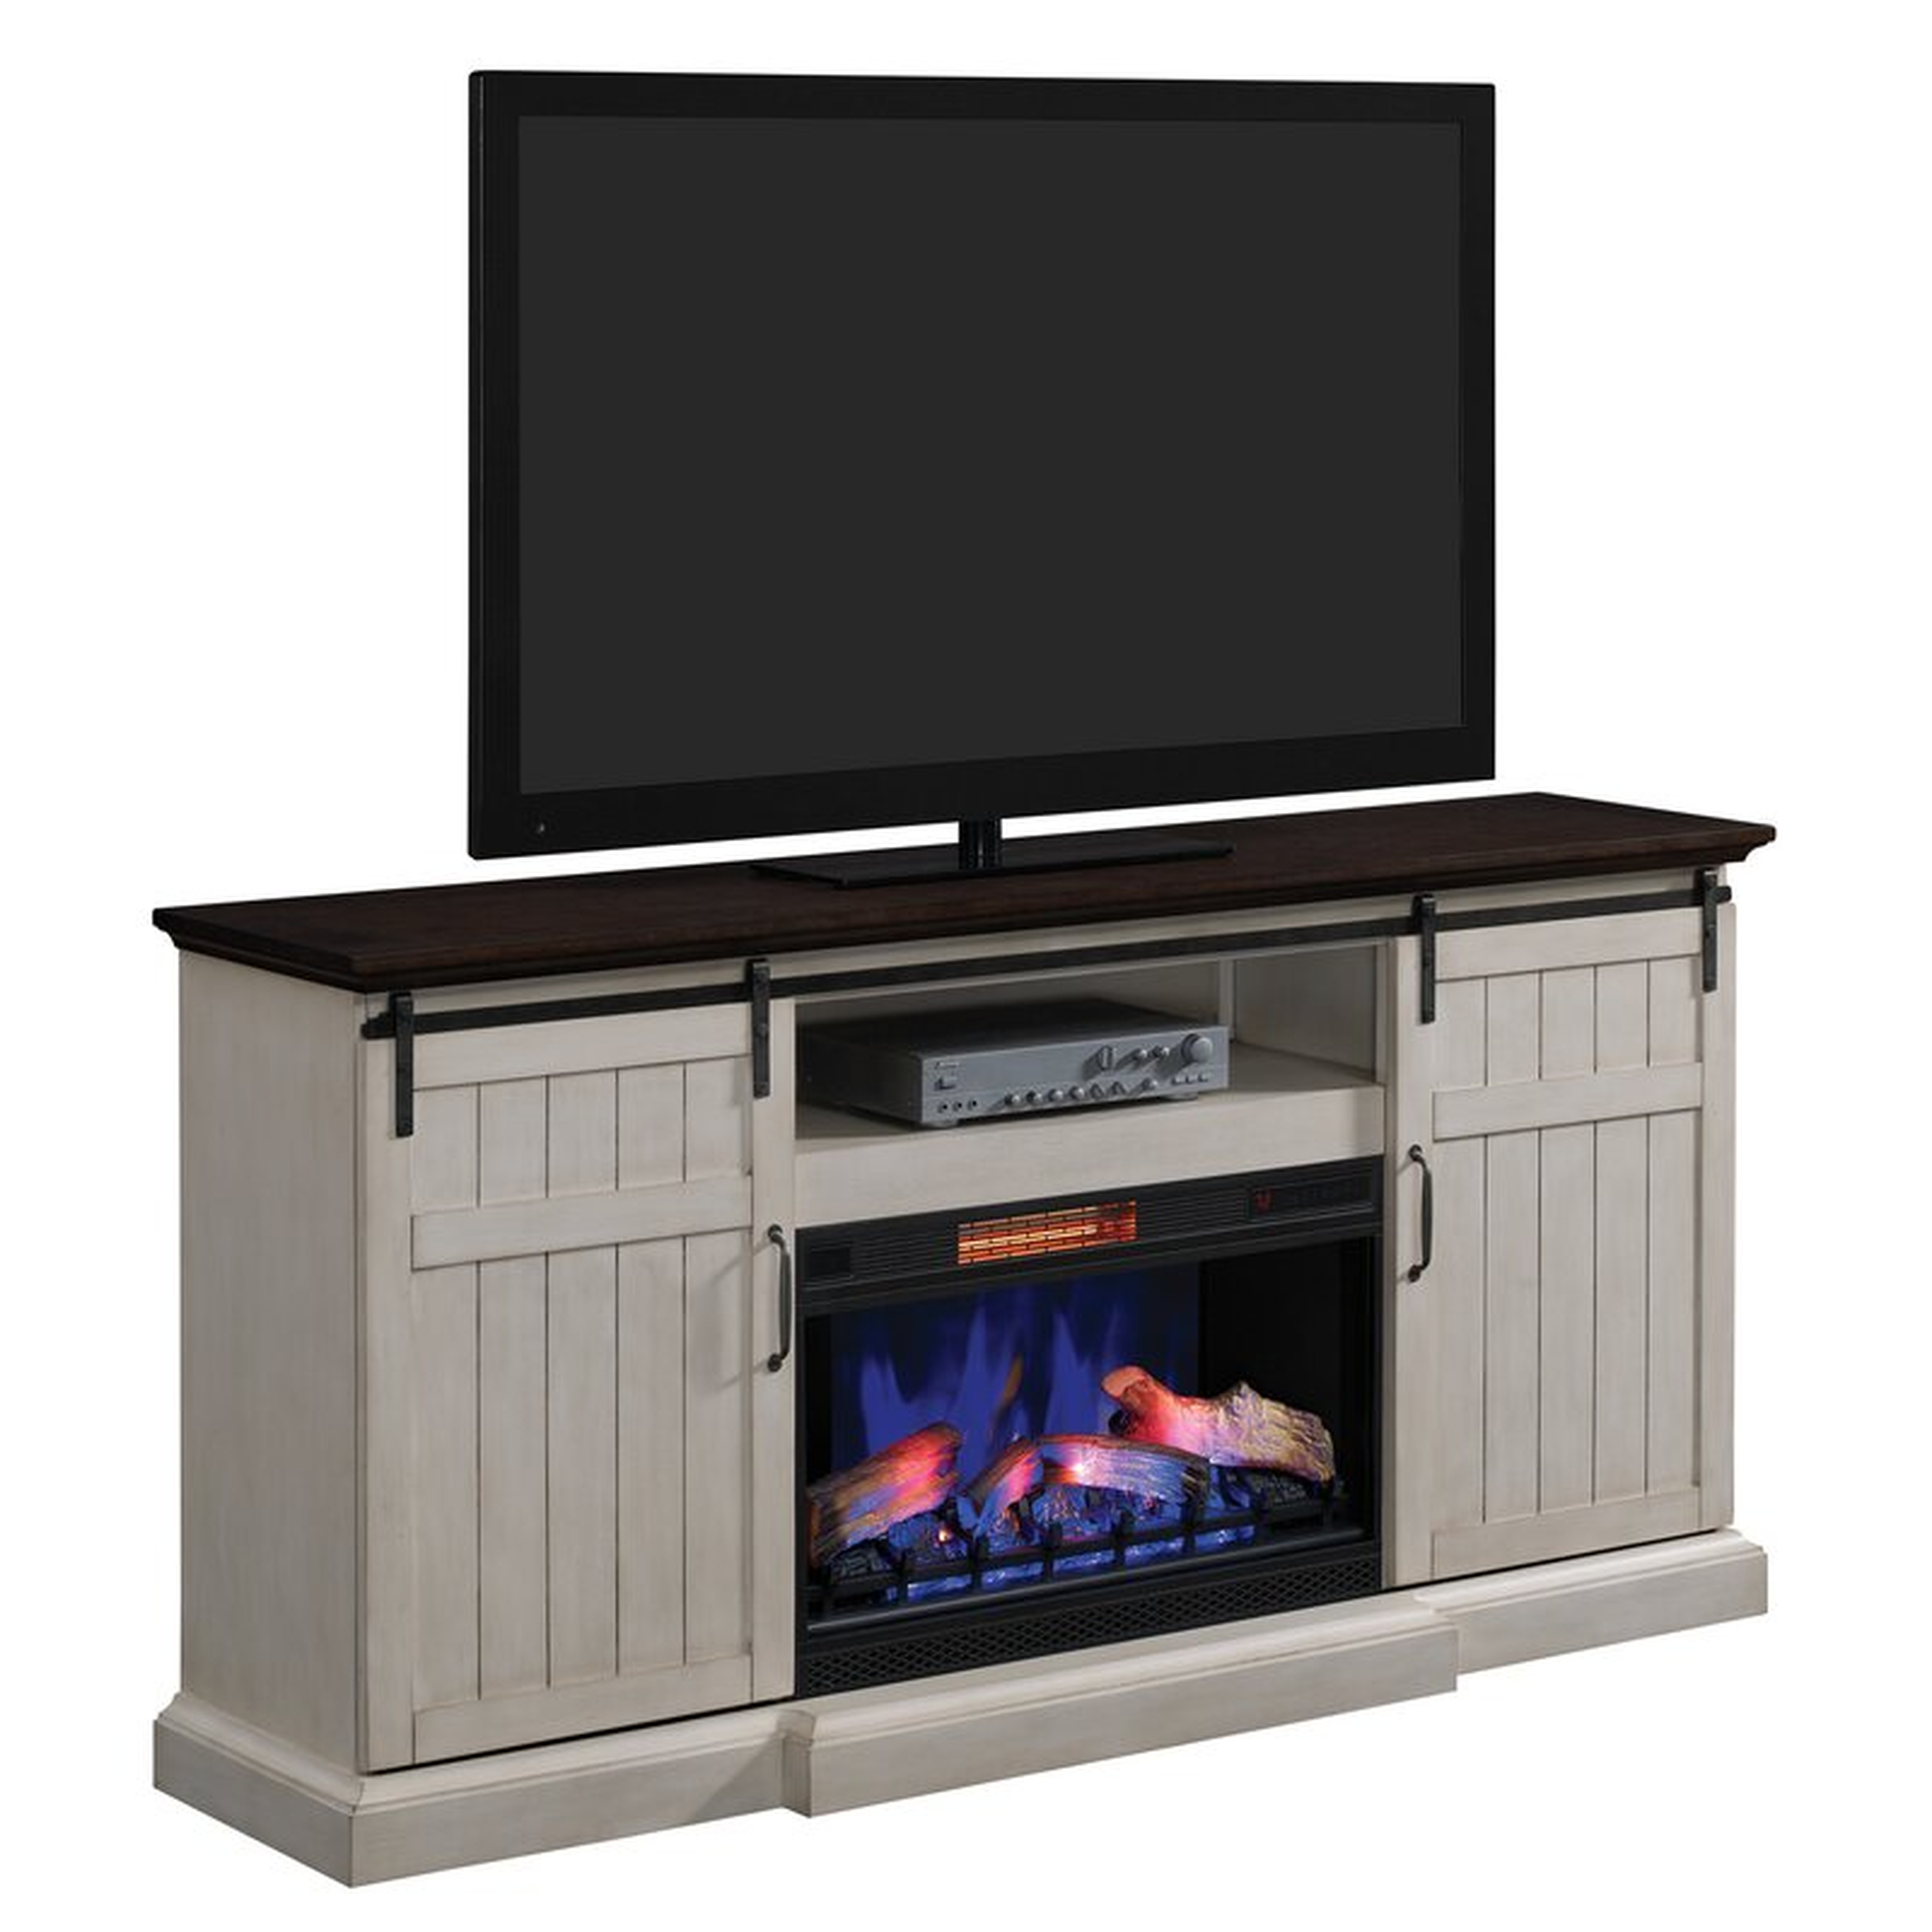 Swedish Hill TV Stand for TVs up to 88" with Electric Fireplace Included - Wayfair